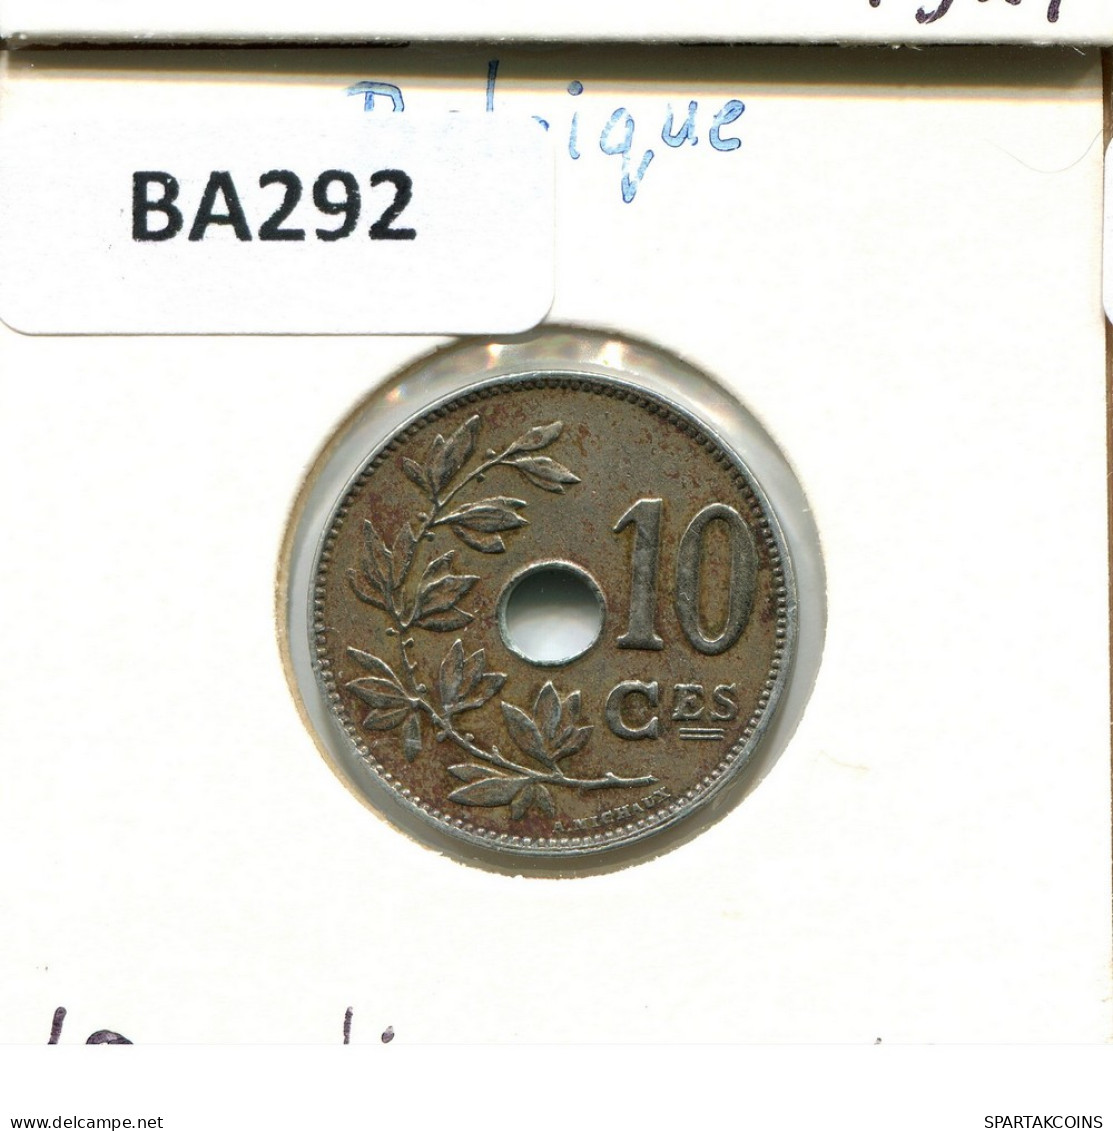 10 CENTIMES 1927 FRENCH Text BELGIUM Coin #BA292.U - 10 Centimes